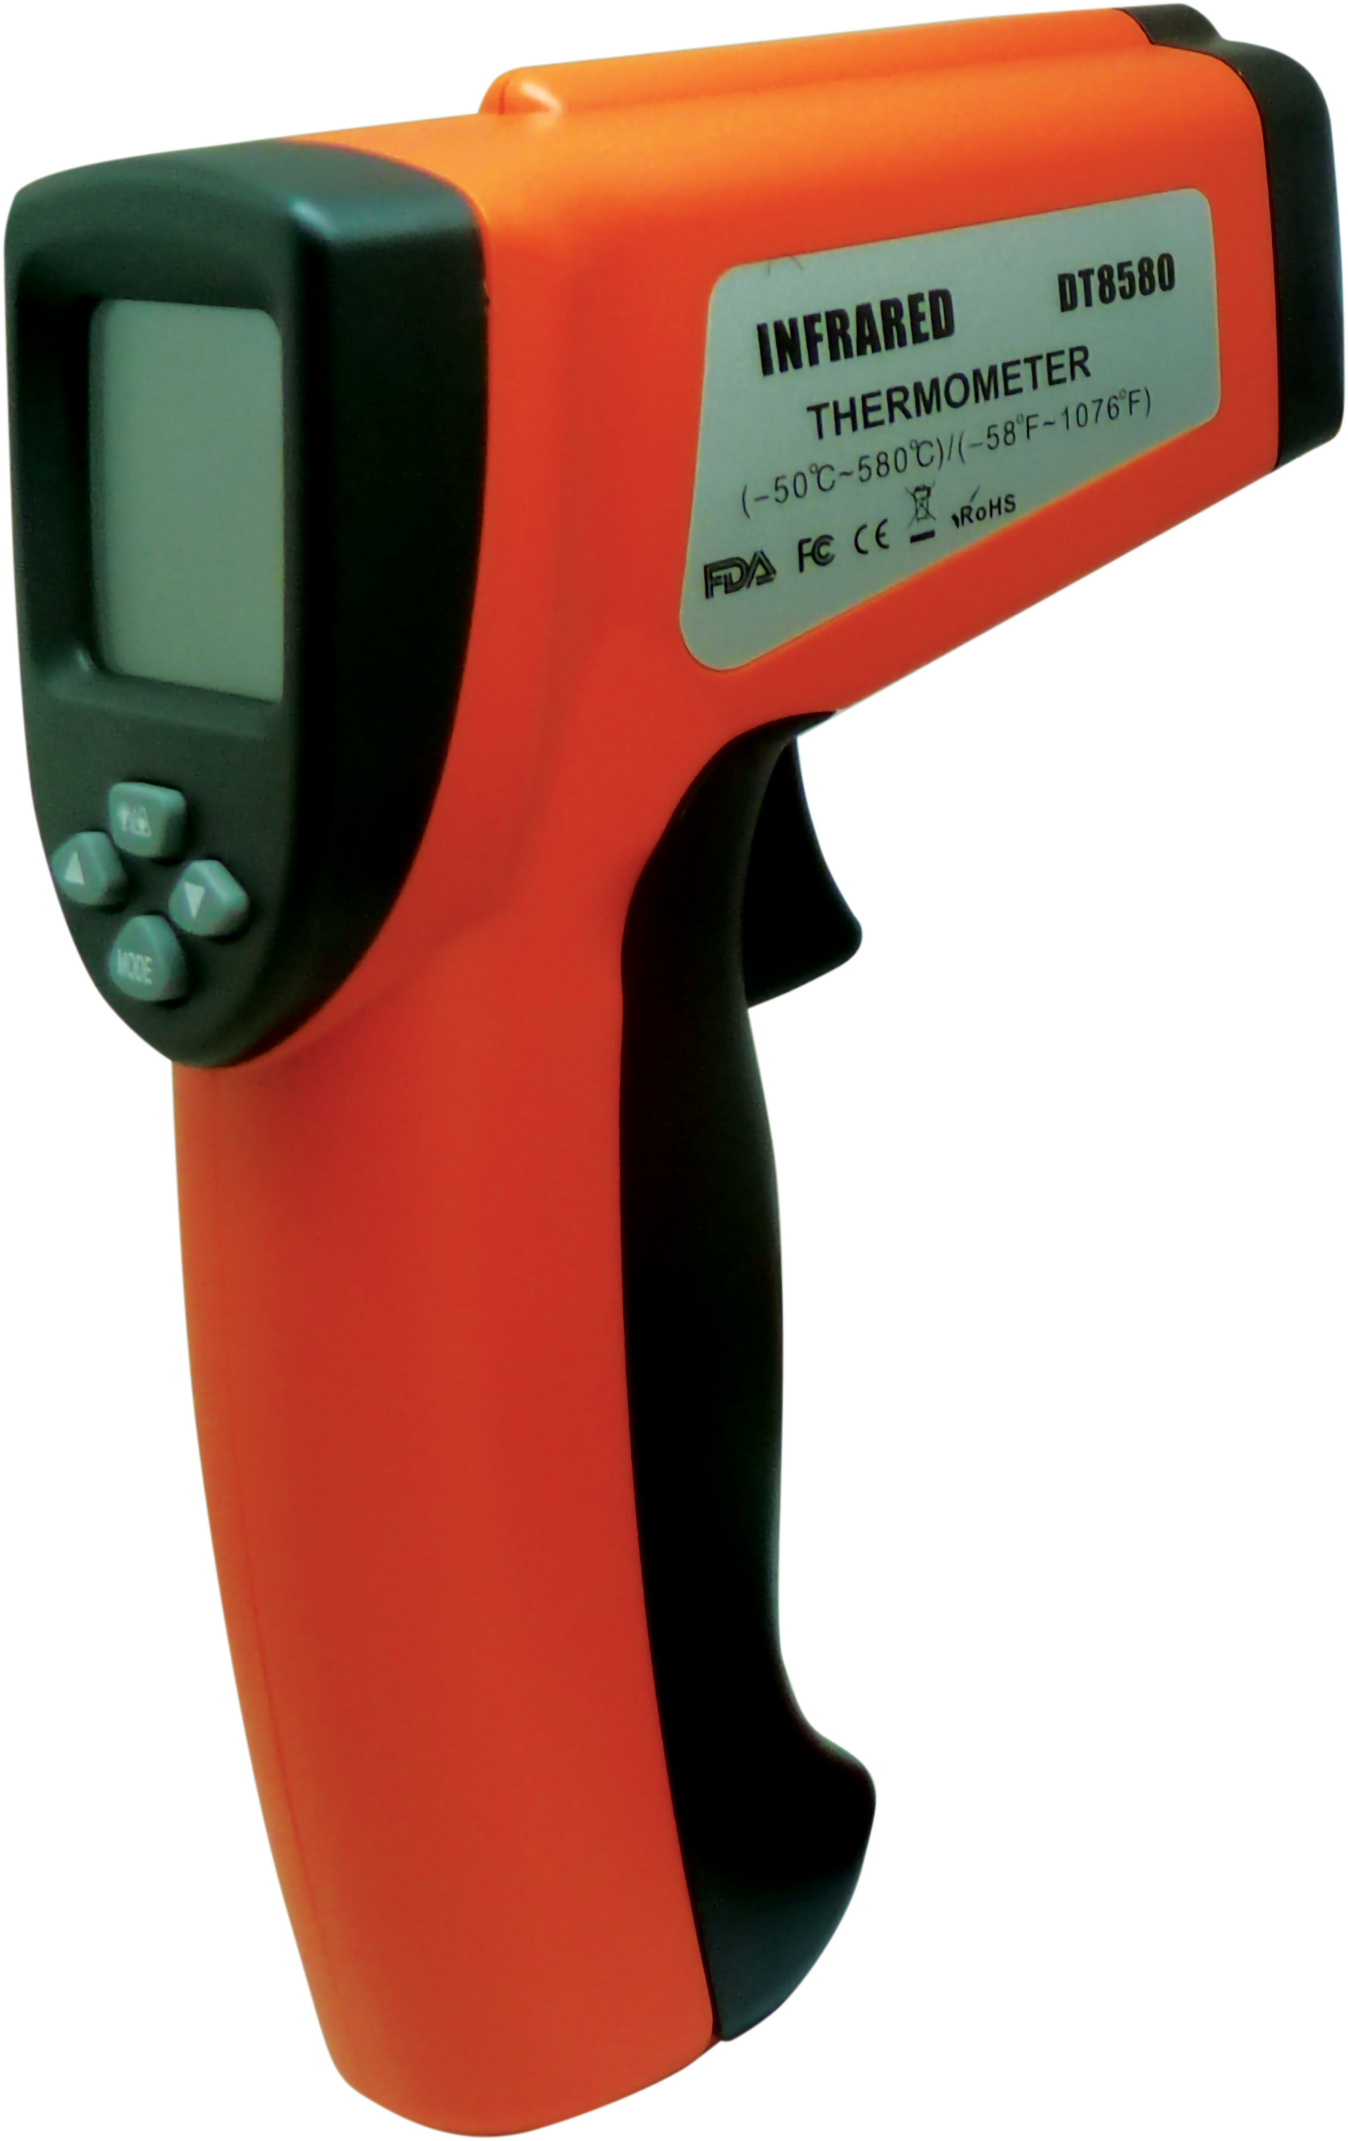 Thermometer Infrared High Temp- -50-580c